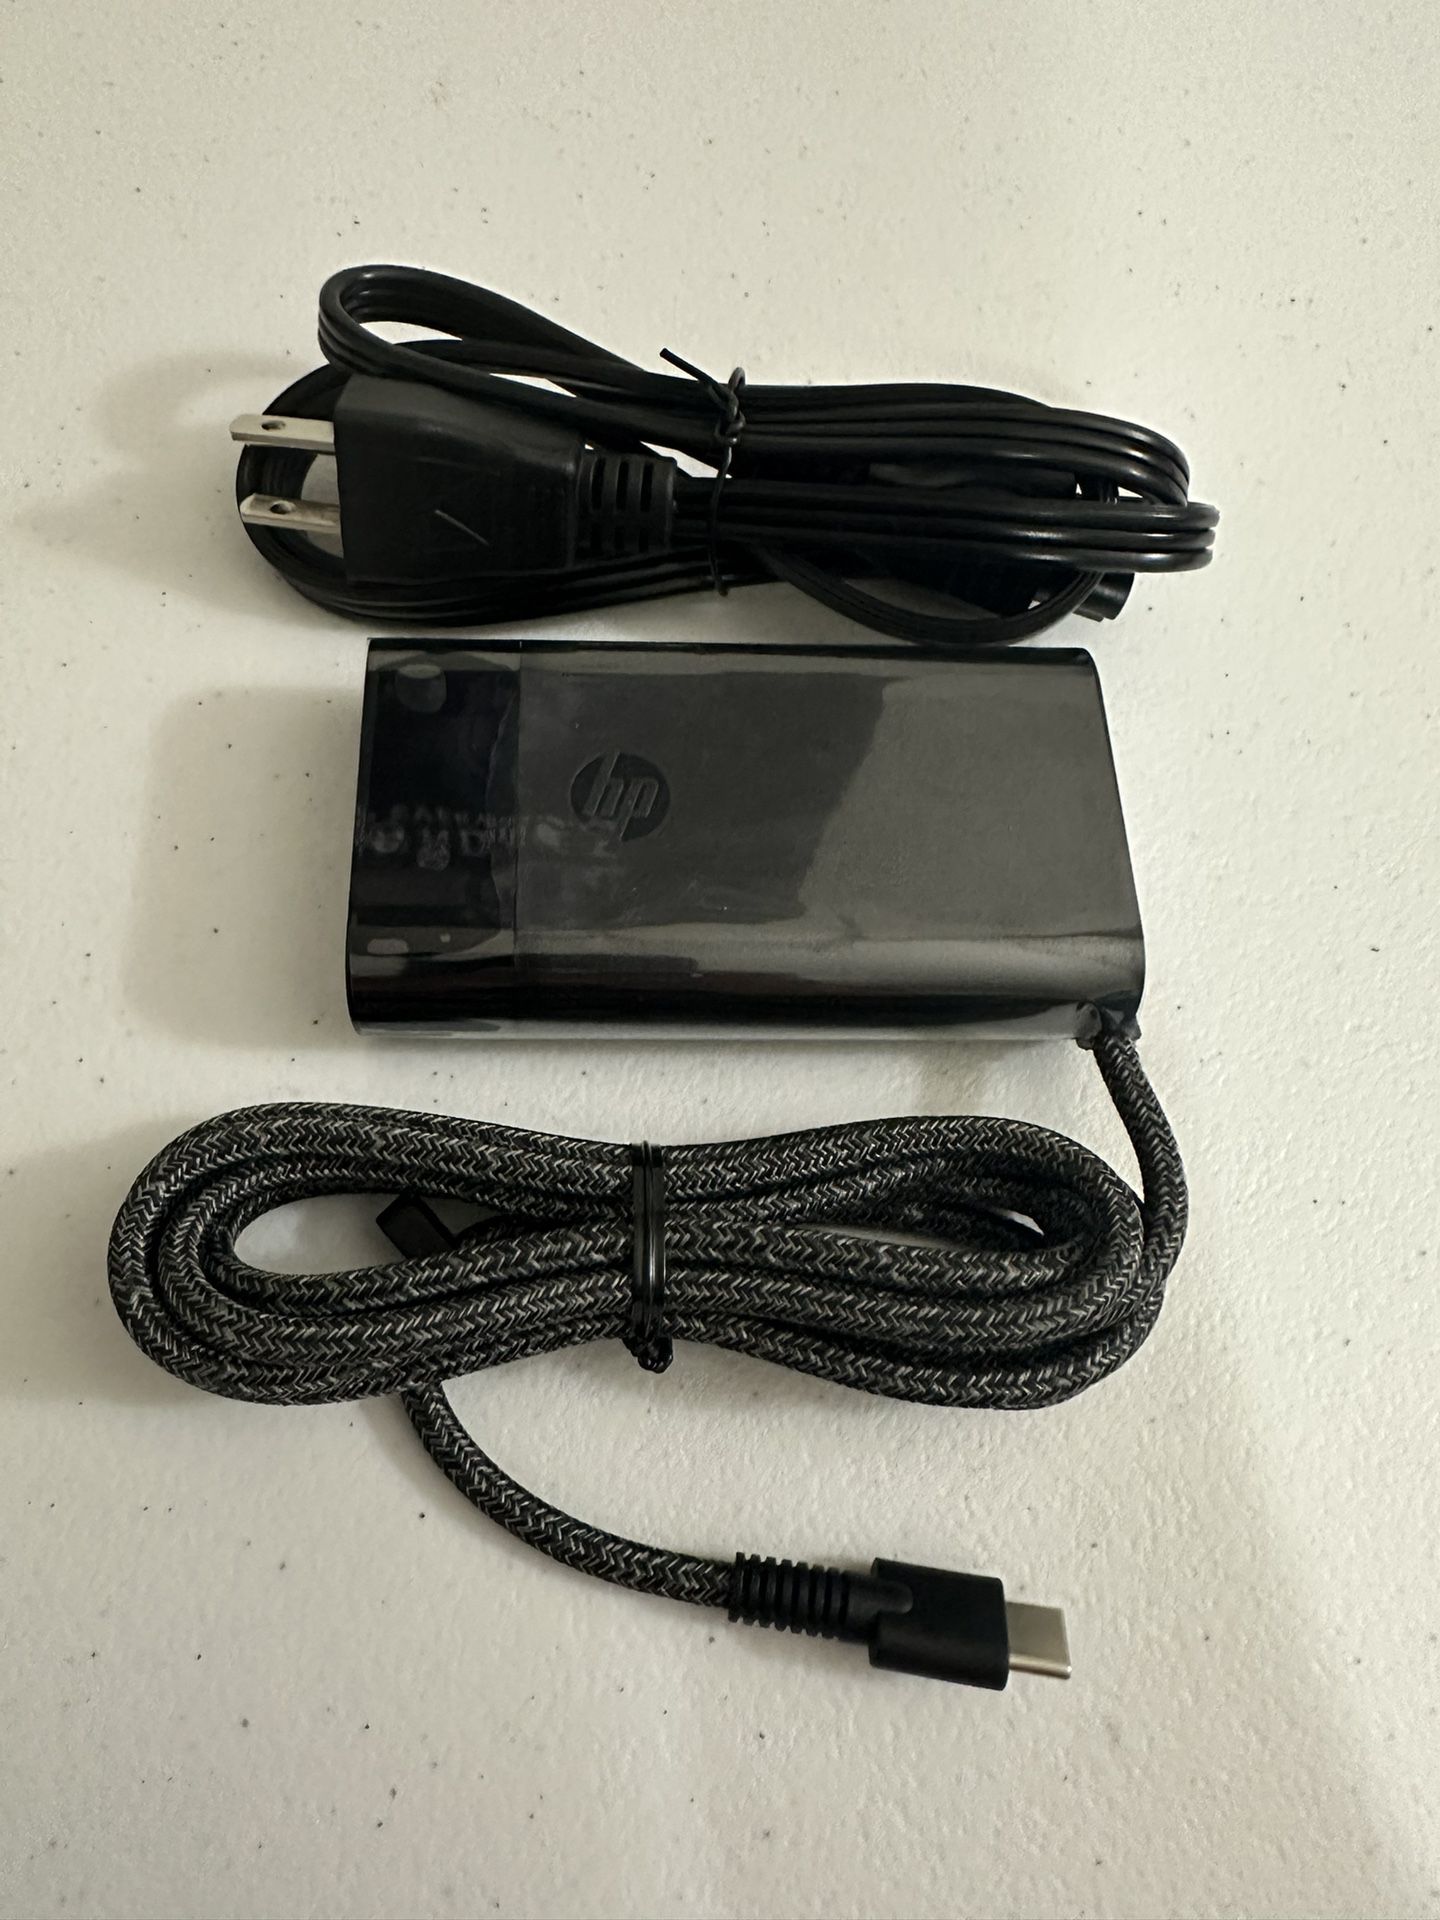 New HP 65W USB-C Slim Laptop Charger